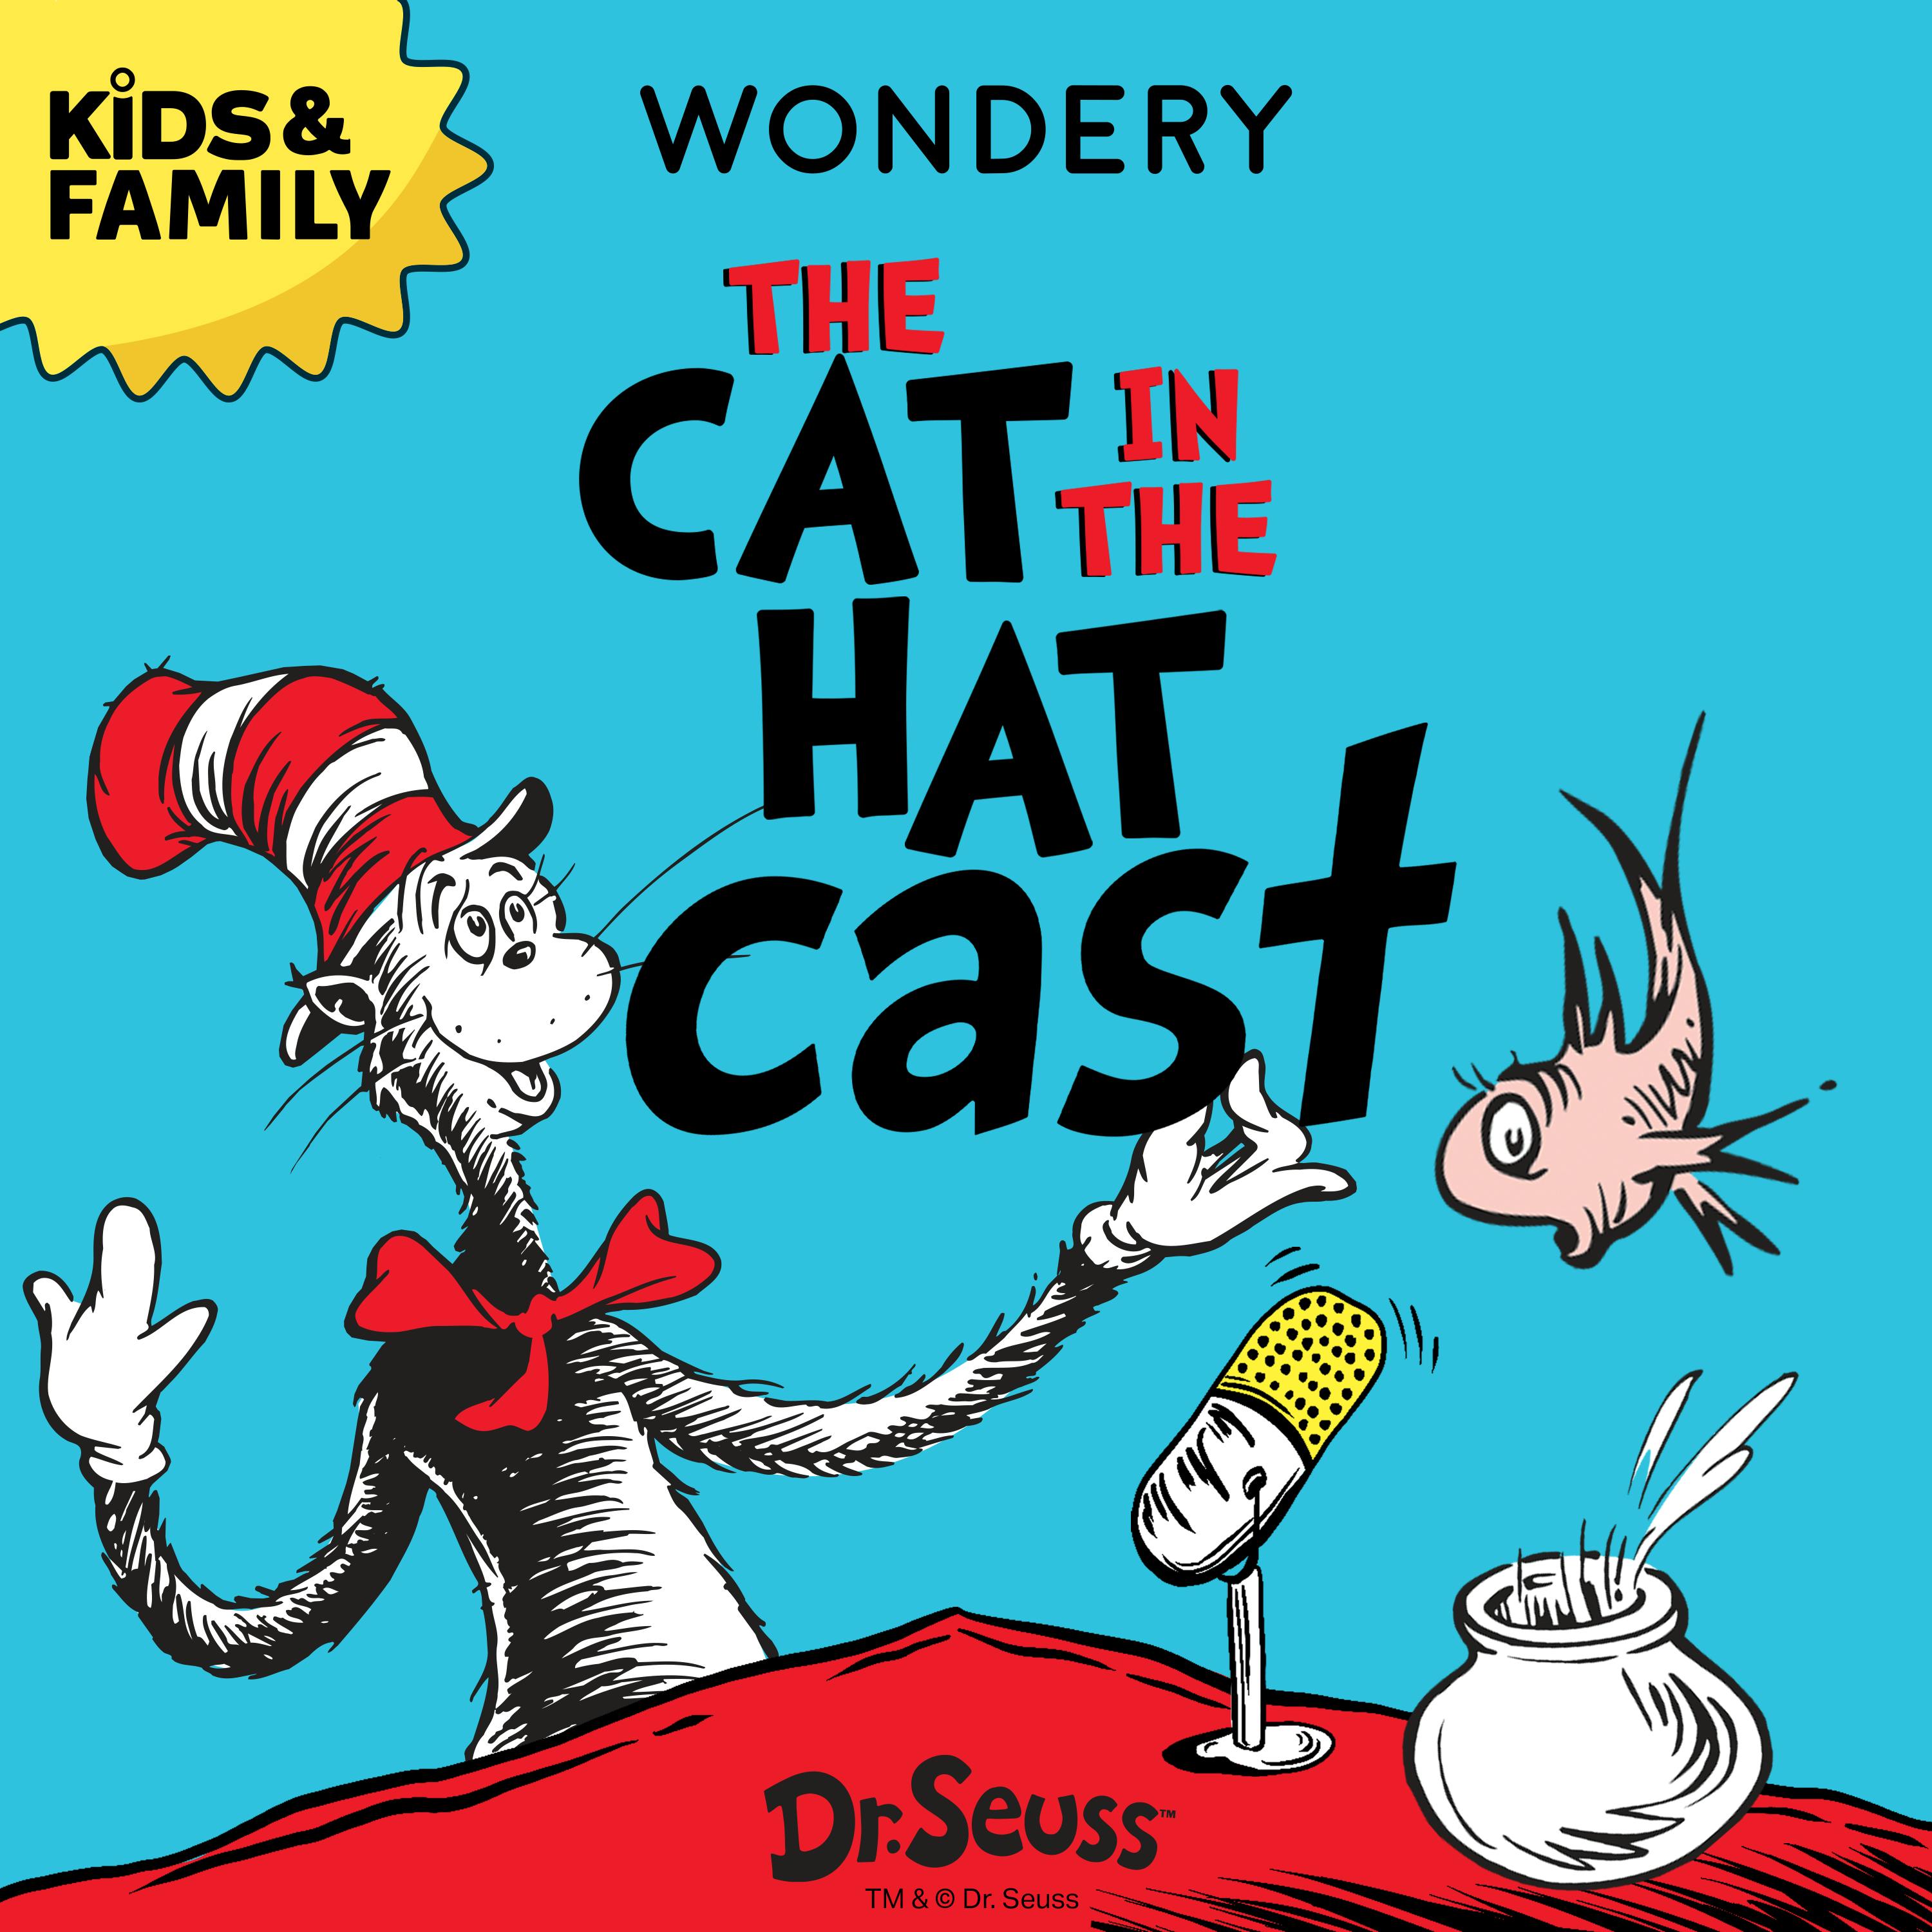 Listen Now: The Cat in the Hat Cast - “Trust Falls”